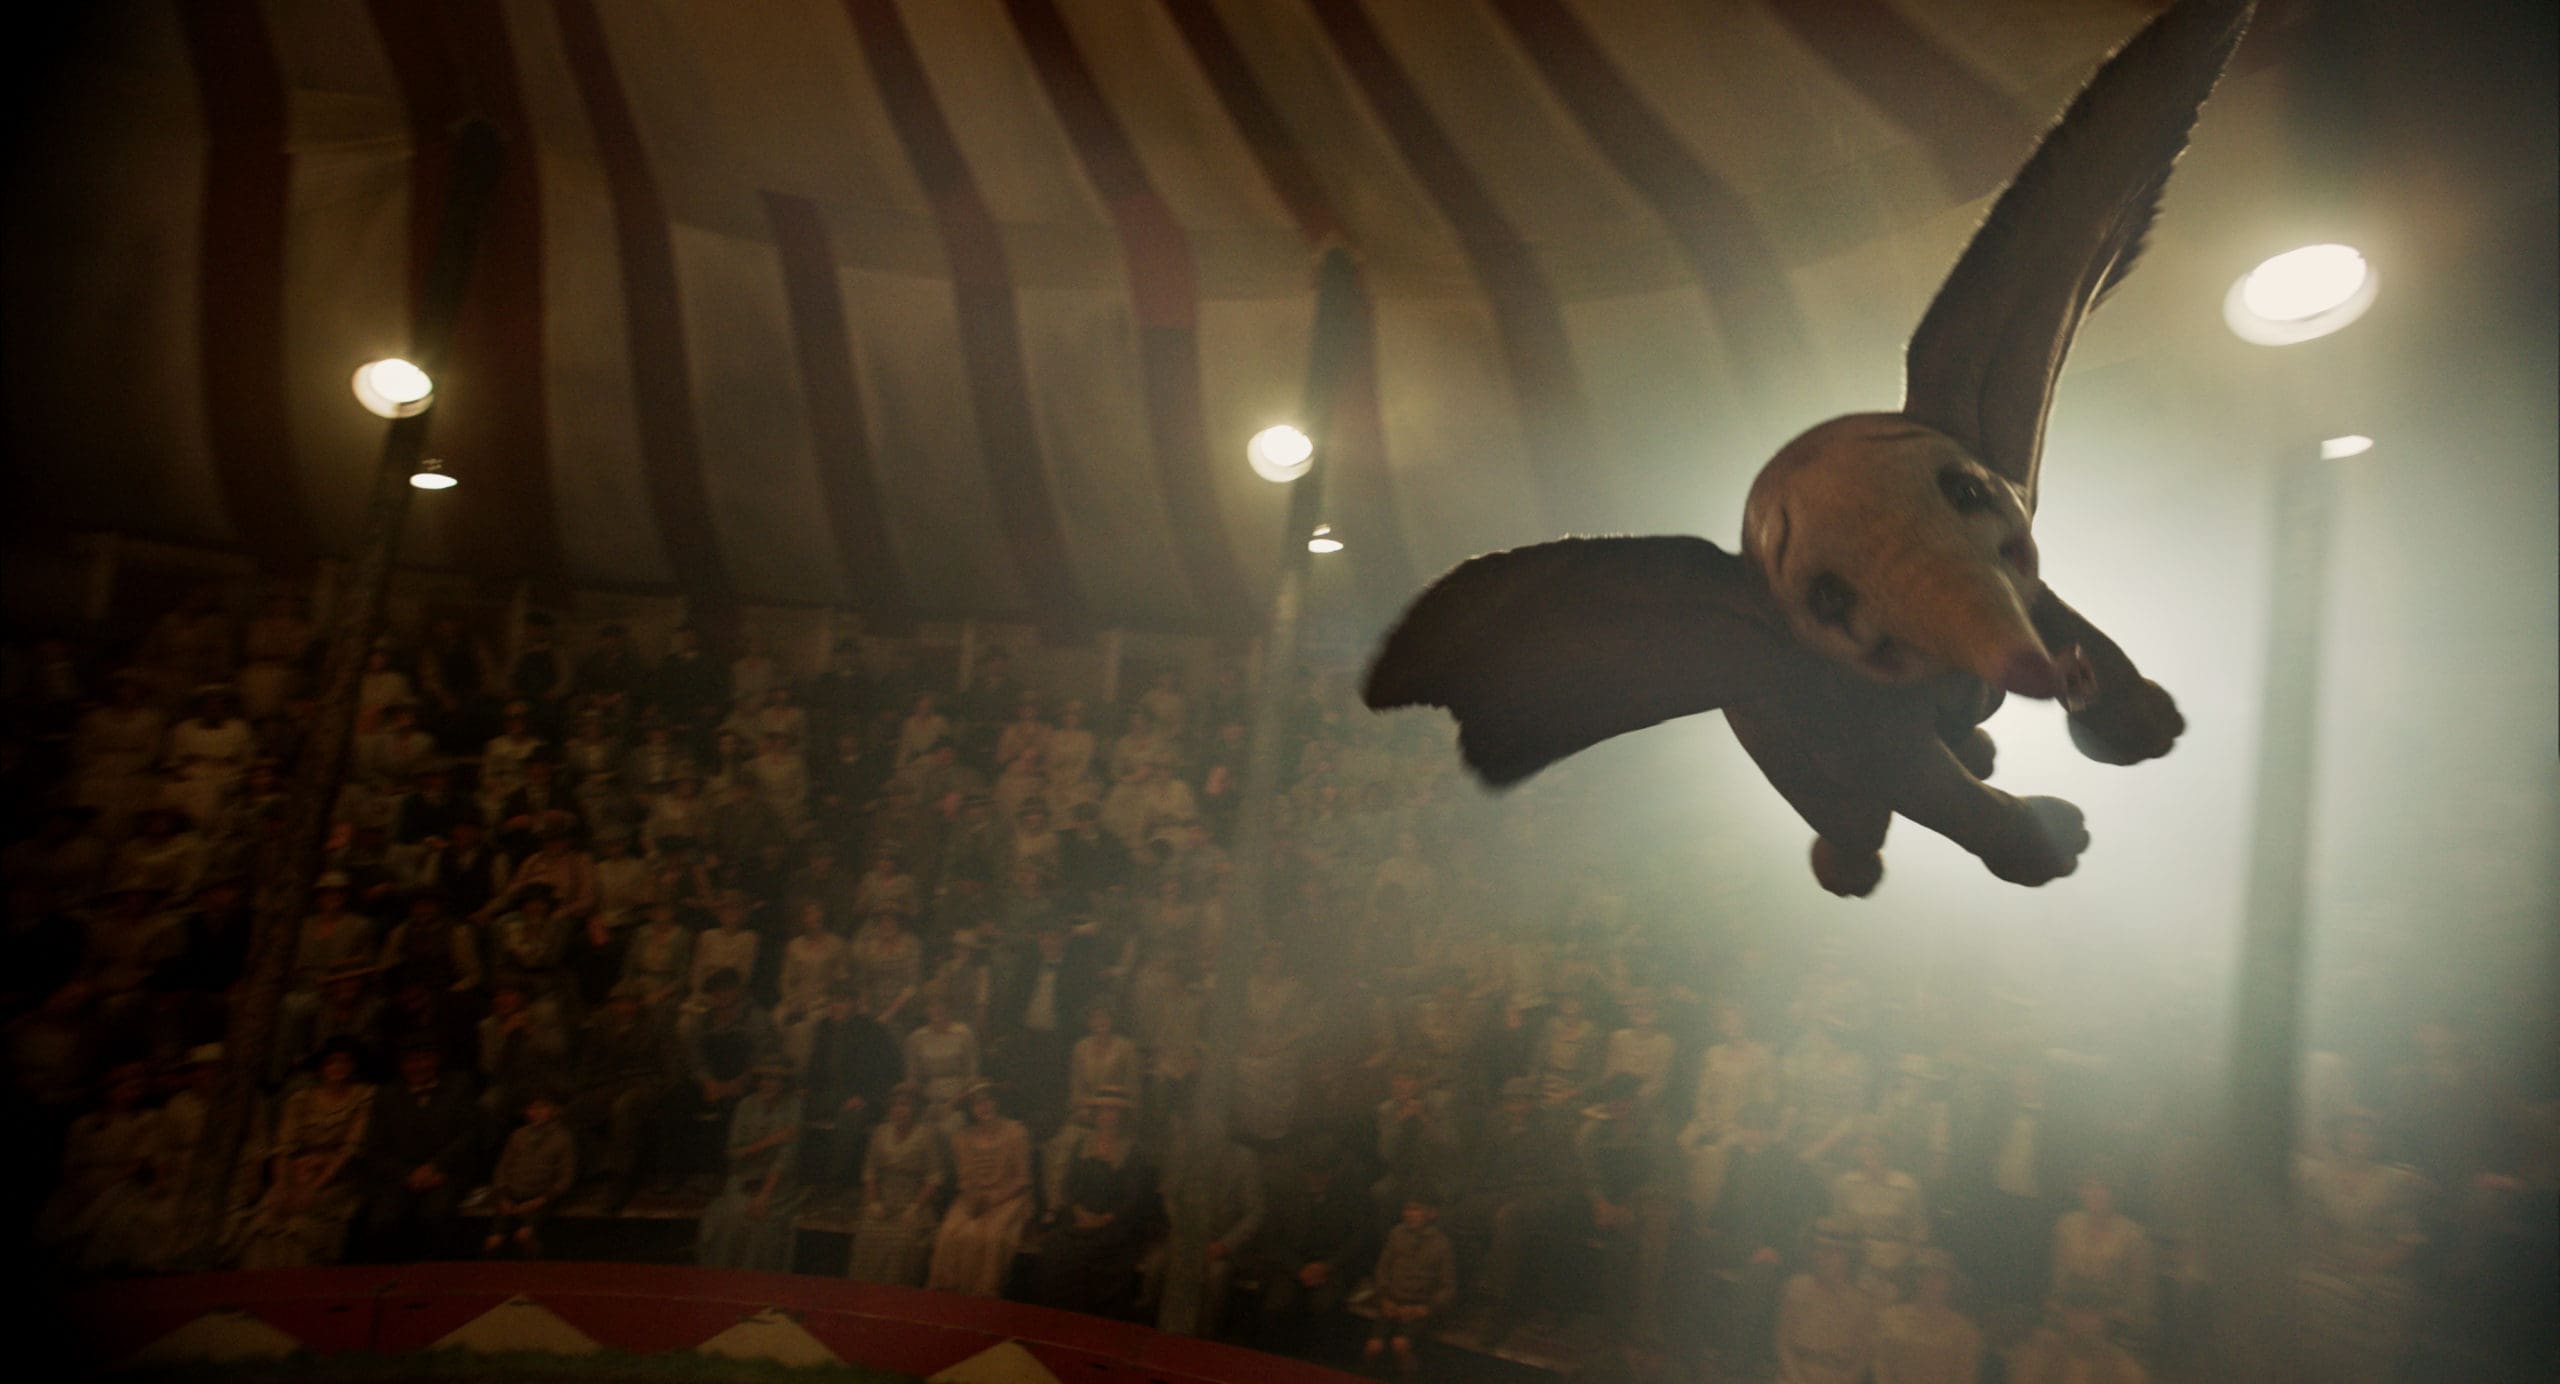 FLYING HIGH – In Disney’s new live-action adventure “Dumbo,” a newborn elephant with giant ears discovers he can fly, and he’s destined to be a star, which may or may not be a good thing. Directed by Tim Burton, “Dumbo” flies into theaters on March 29, 2019.